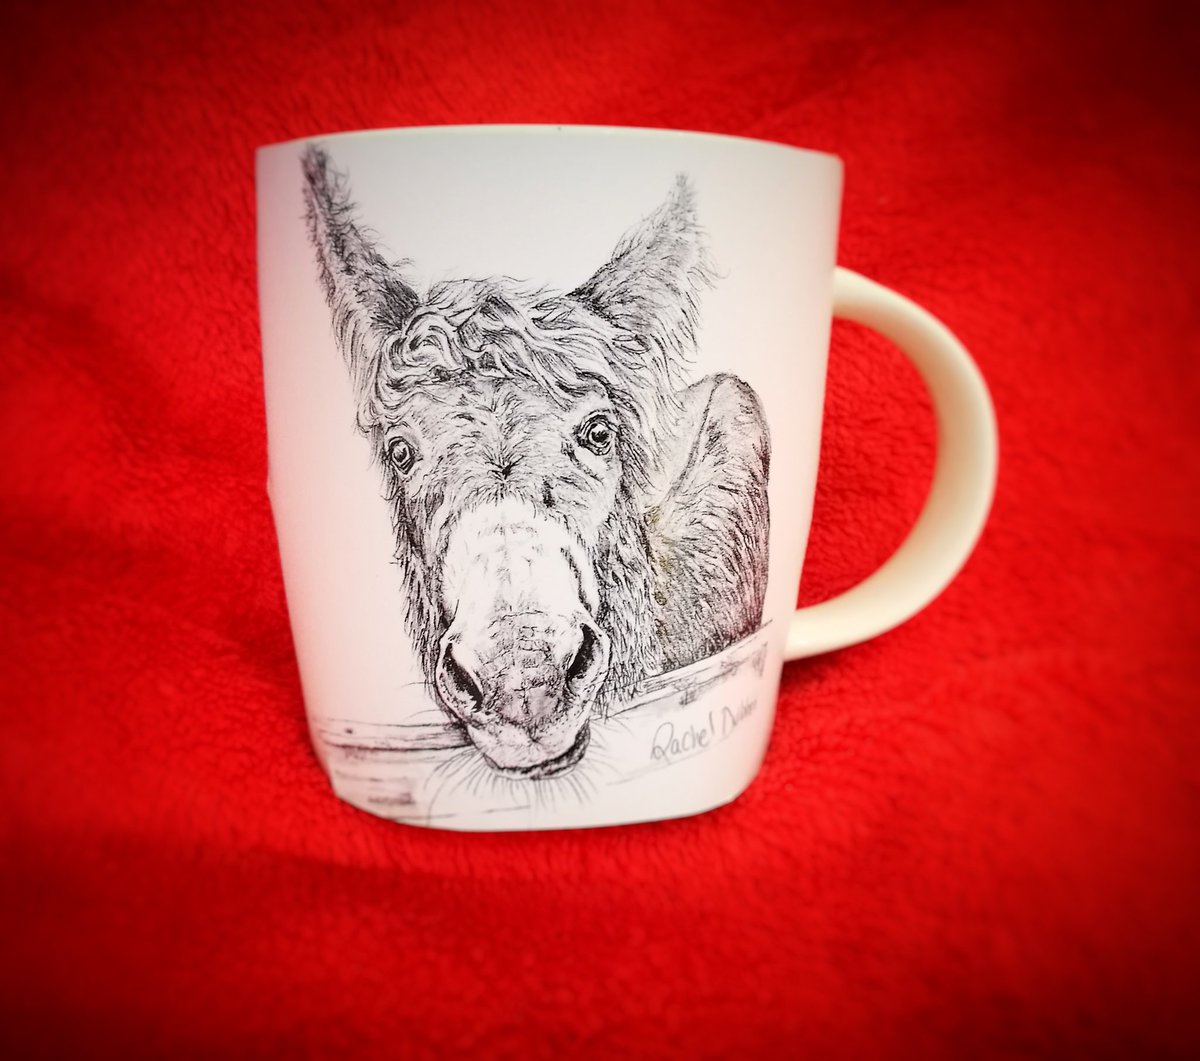 Have you got a favorite mug? Please let me know why. @jill_holtz @DubberTrevor @WomensInspireIE @networkgalway @EmpowerHerIE
@seanna68 @irishhealthhour @coopershill1 @CEEscapes #animalslovers #donkey #favouritemug #Galway #research